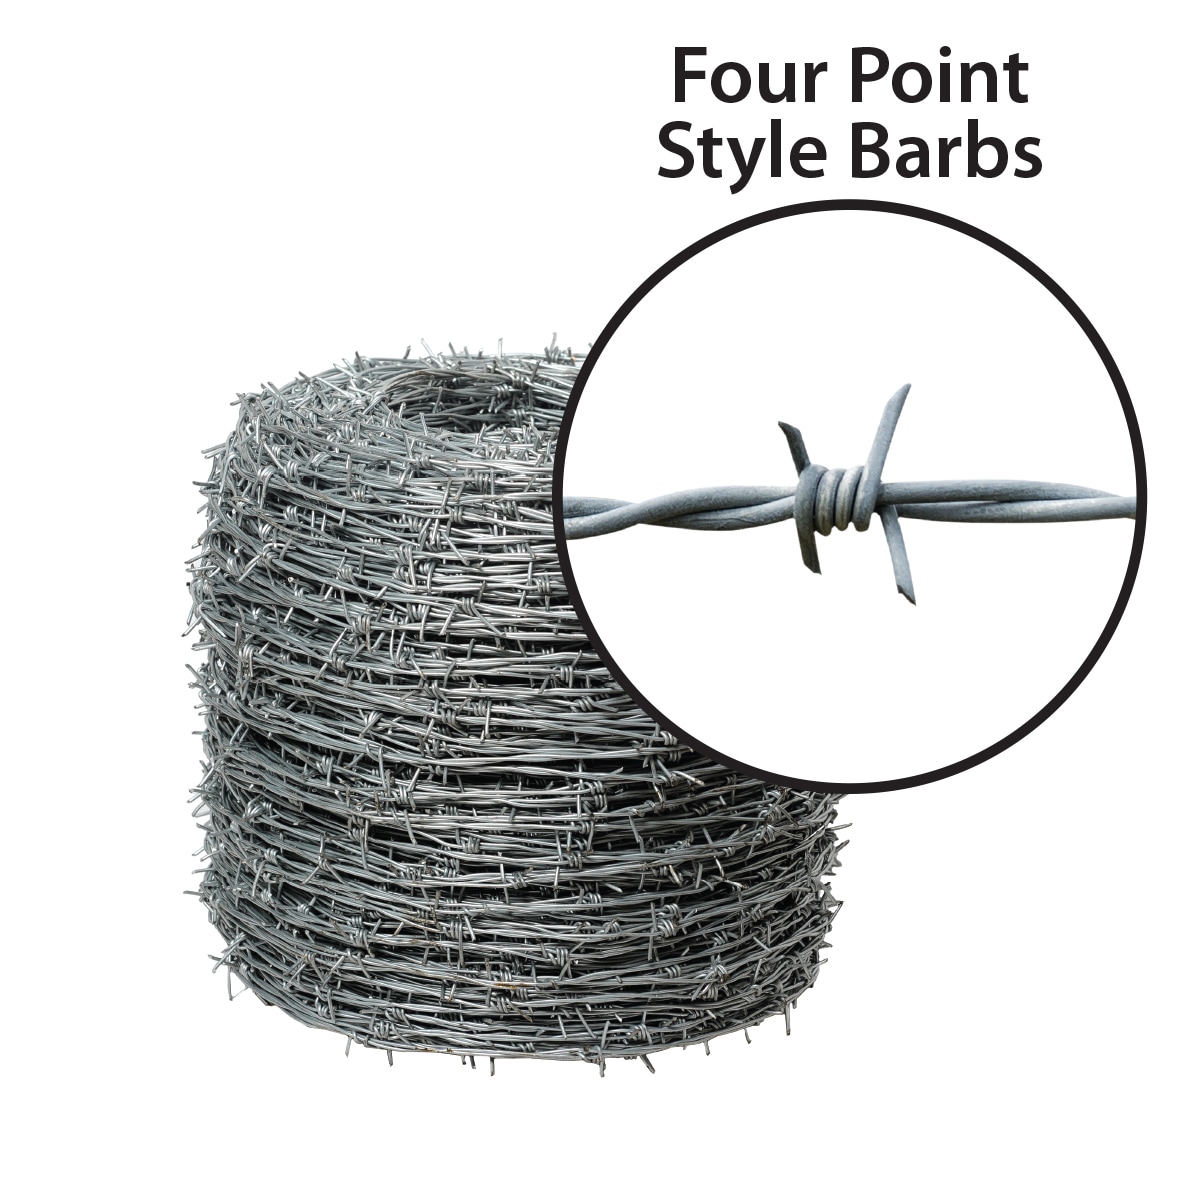 IRONRIDGE 1320-ft x 1-ft 15.5-Gauge Gray Steel Barbed Wire Rolled Fencing  in the Rolled Fencing department at